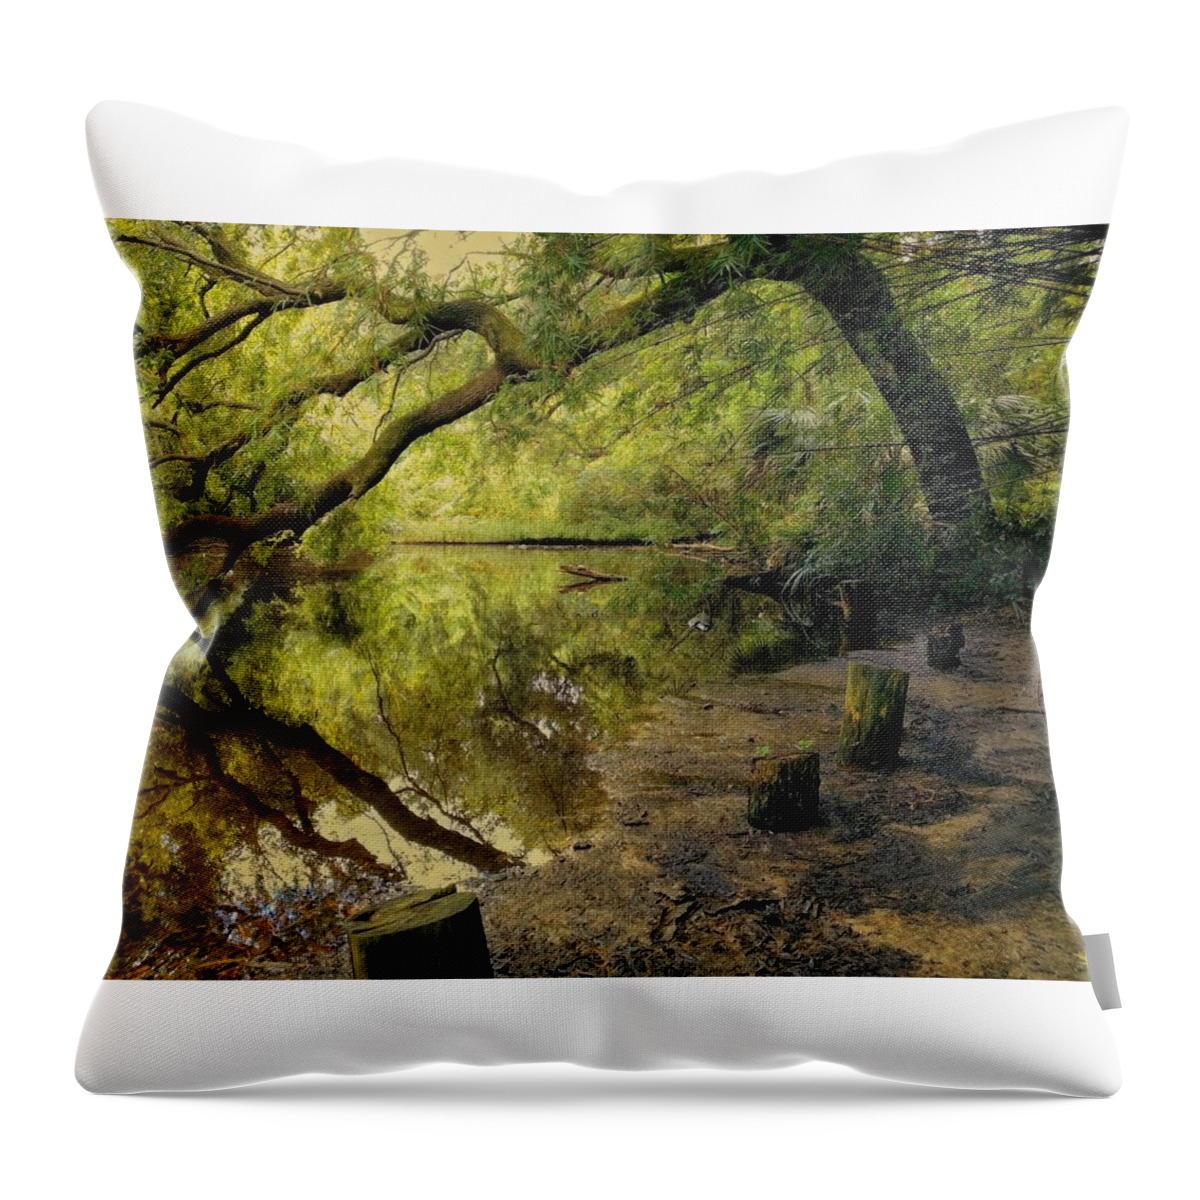 Swamp Throw Pillow featuring the photograph Secluded Sanctuary by Sherry Kuhlkin